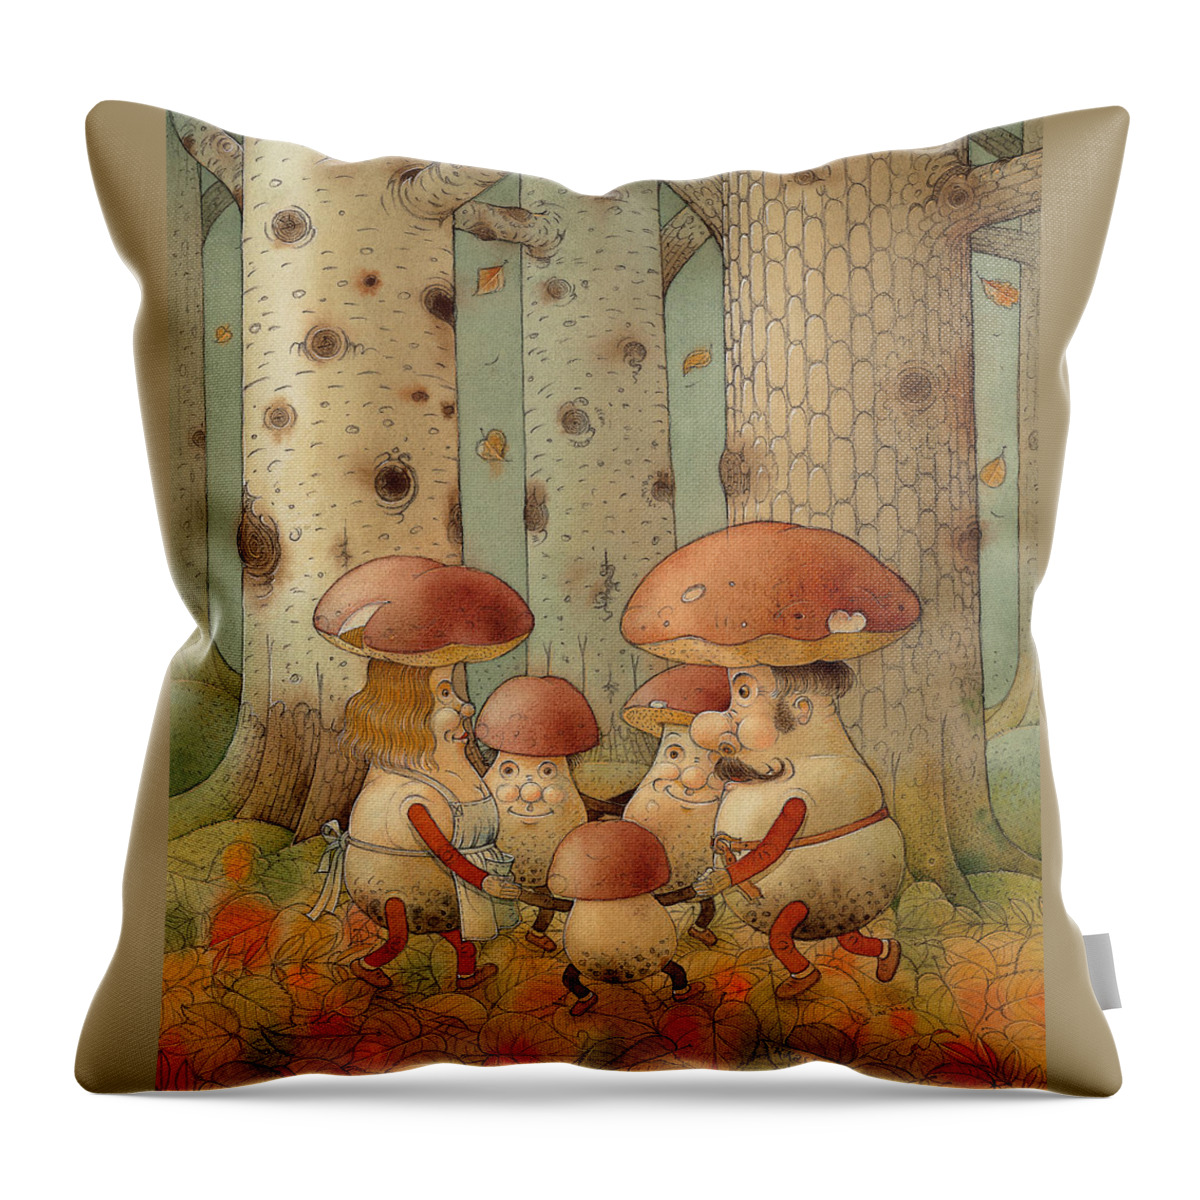 Mushrooms Landscape Forest Autumn Throw Pillow featuring the painting Mushrooms by Kestutis Kasparavicius